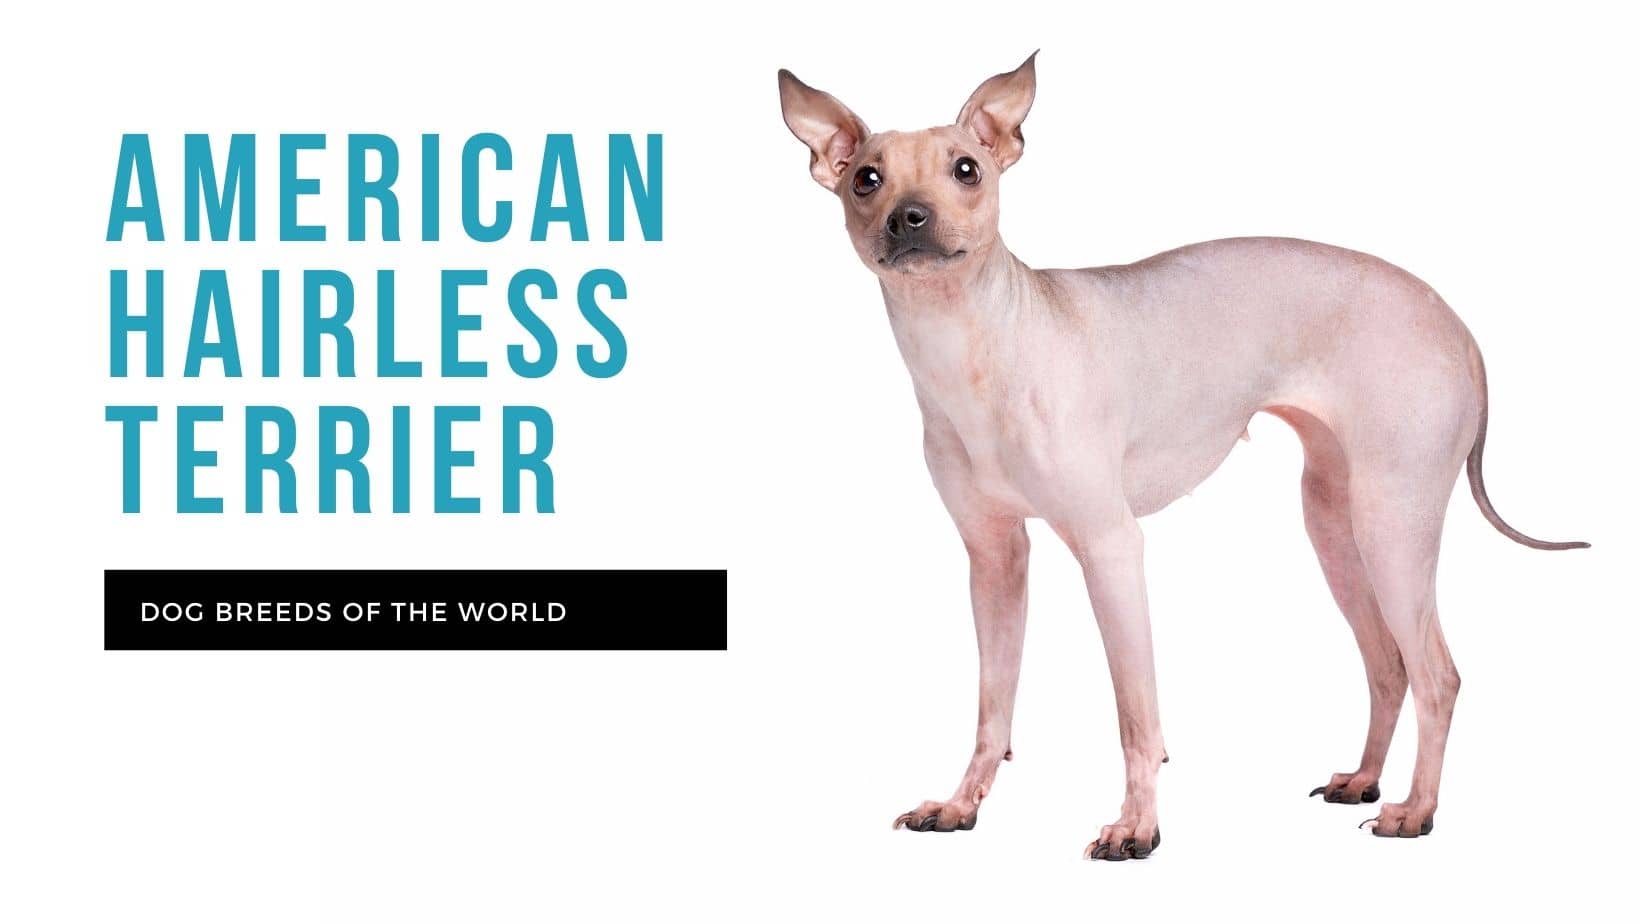 are american hairless terriers intelligent dogs